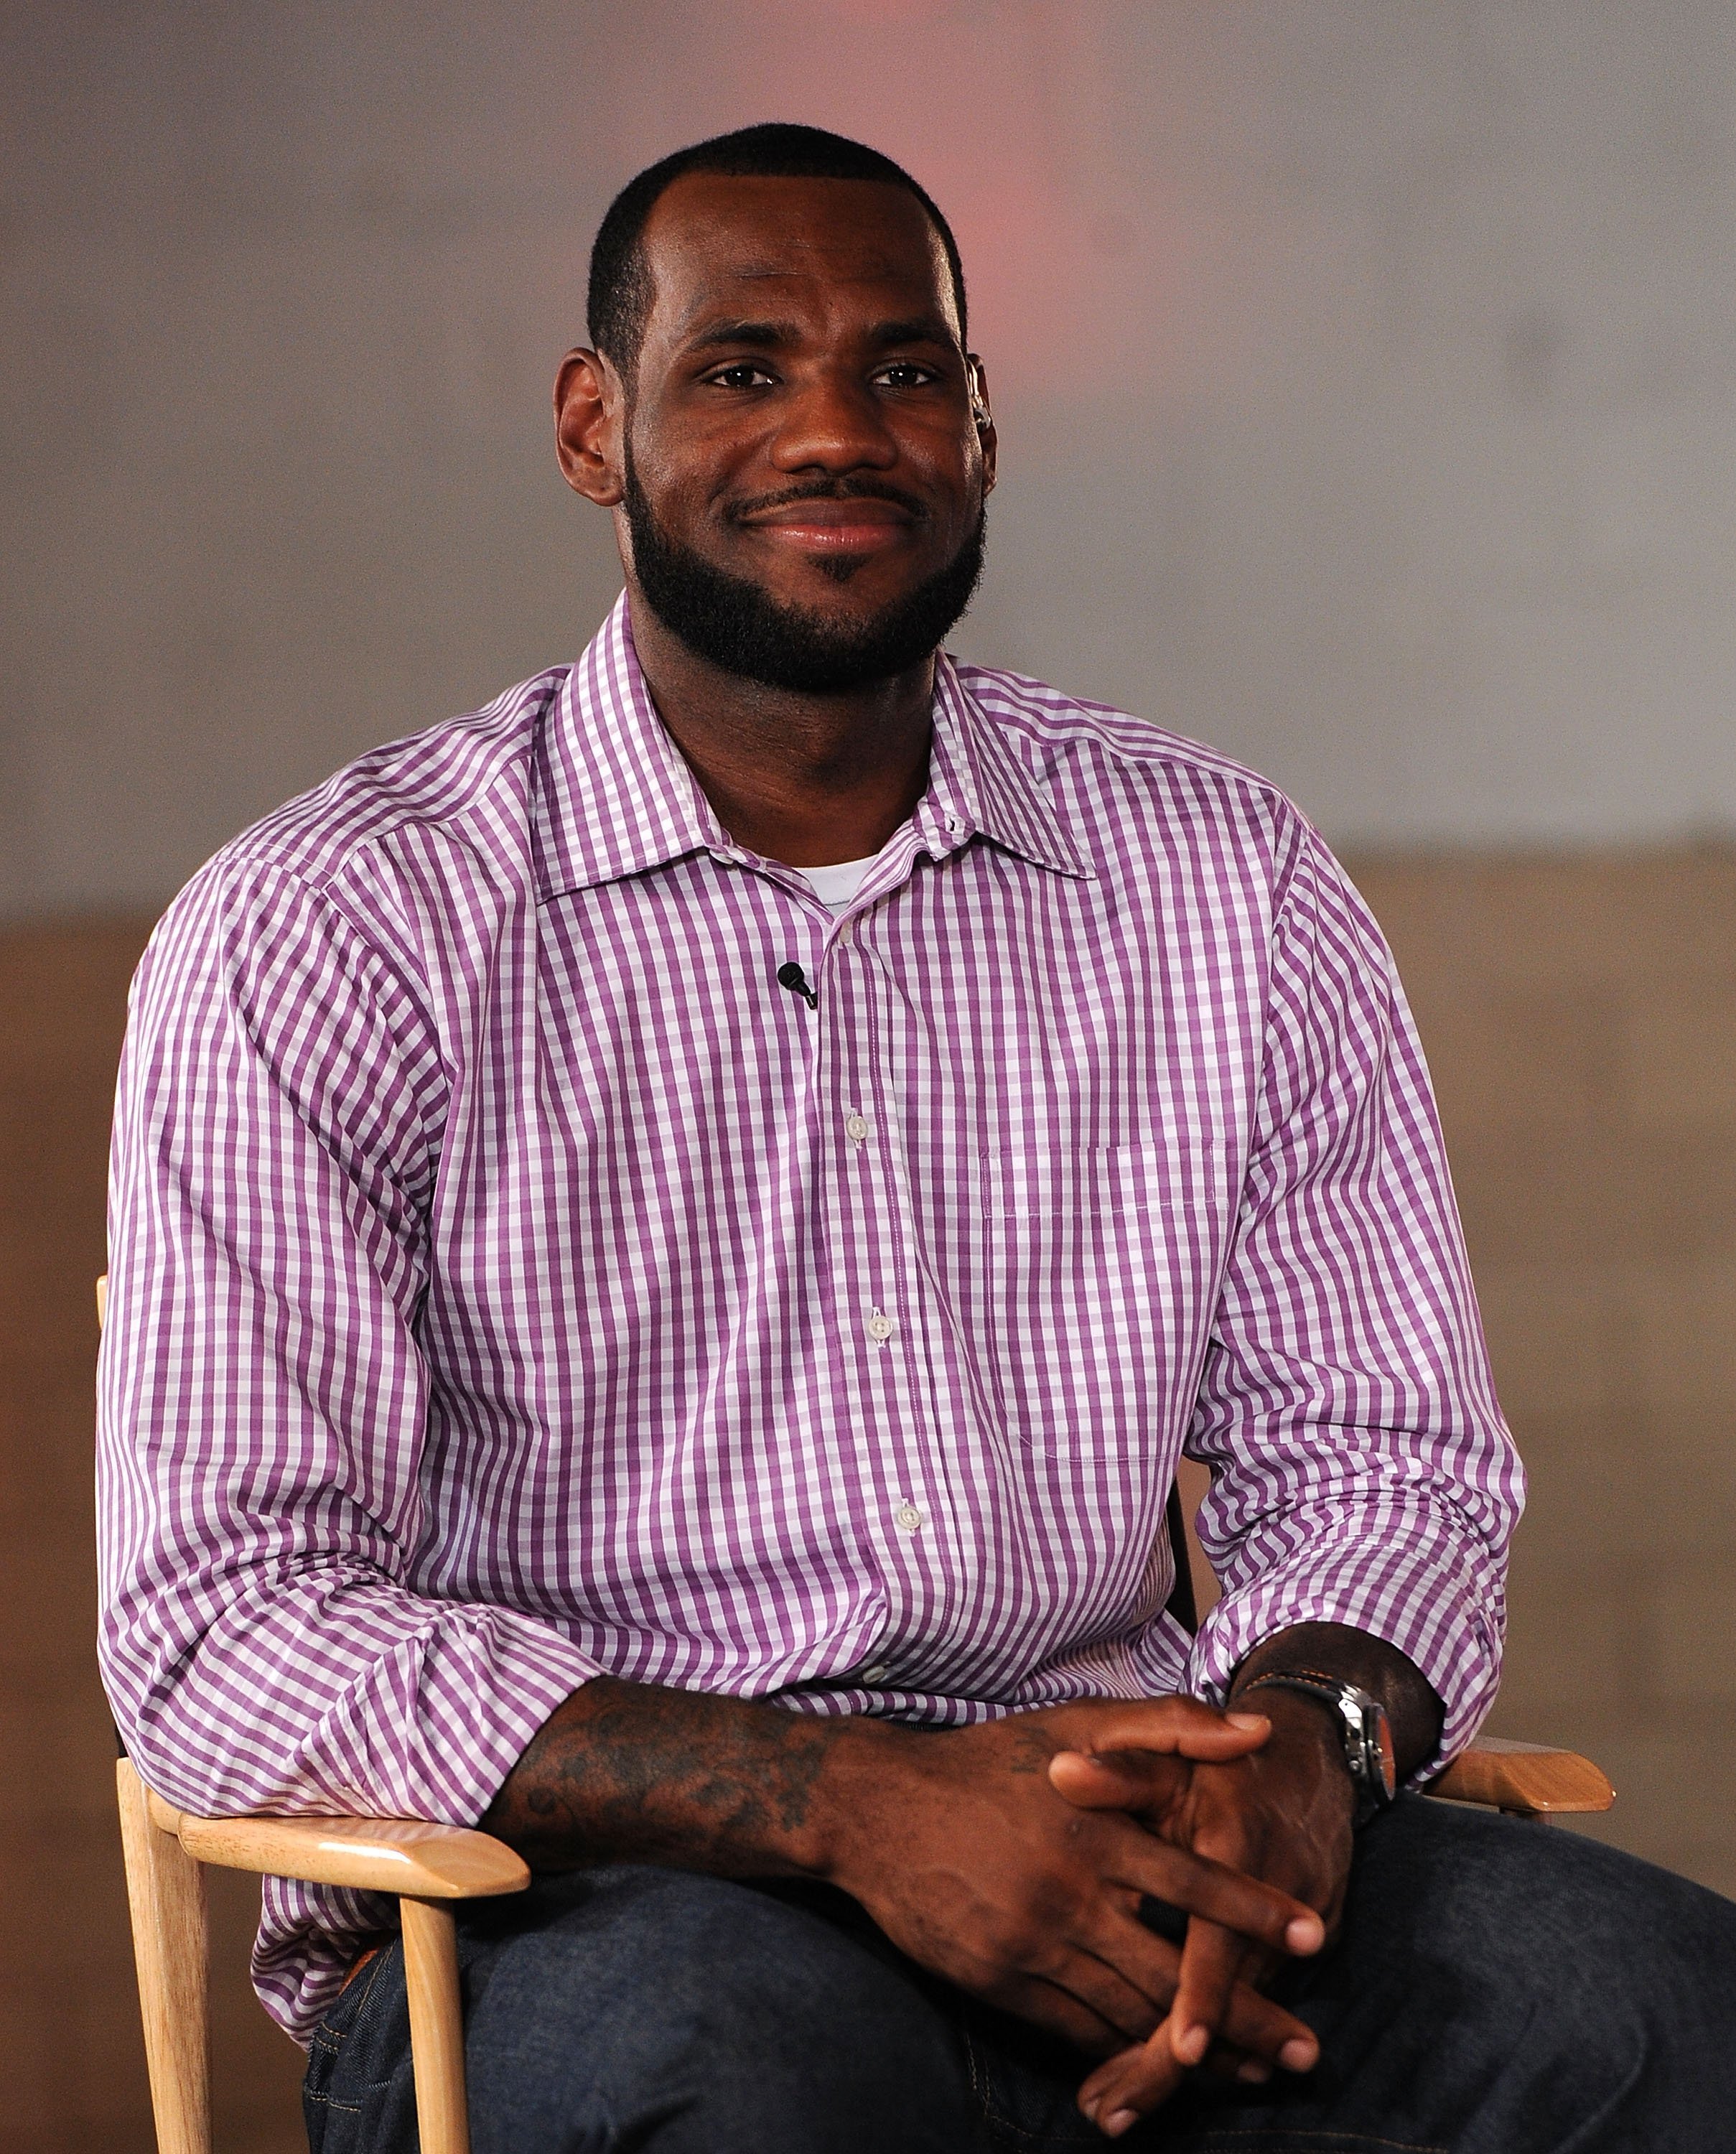 LeBron James during a press conference in July 2010. | Photo: Getty Images